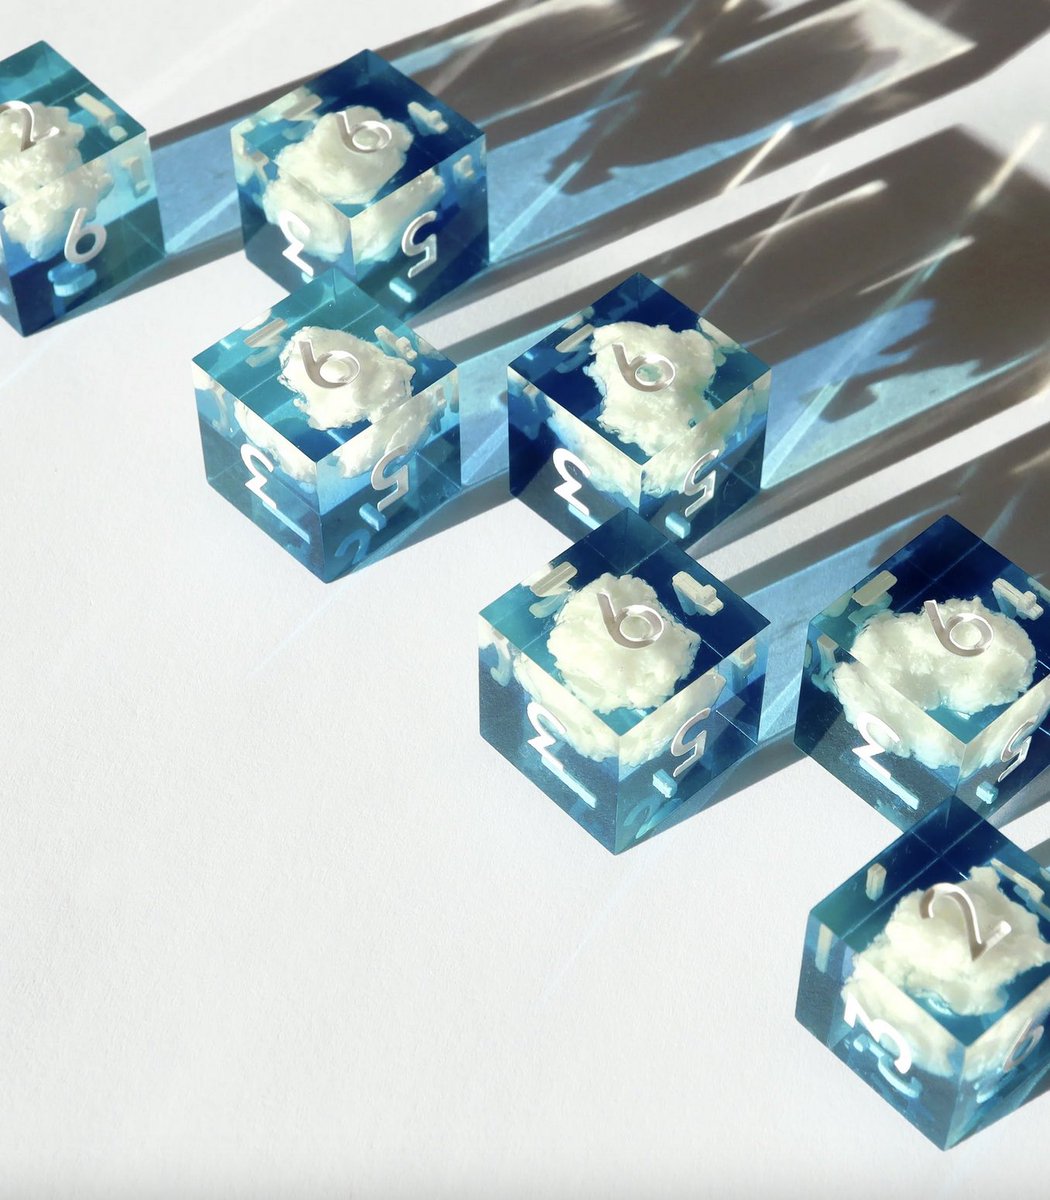 Looking forward to blue skies and warm days ahead 🌤️ Blue Sky Hymnal 6d6 sets are now available on the webstore! #dnd #ttrpg #dice